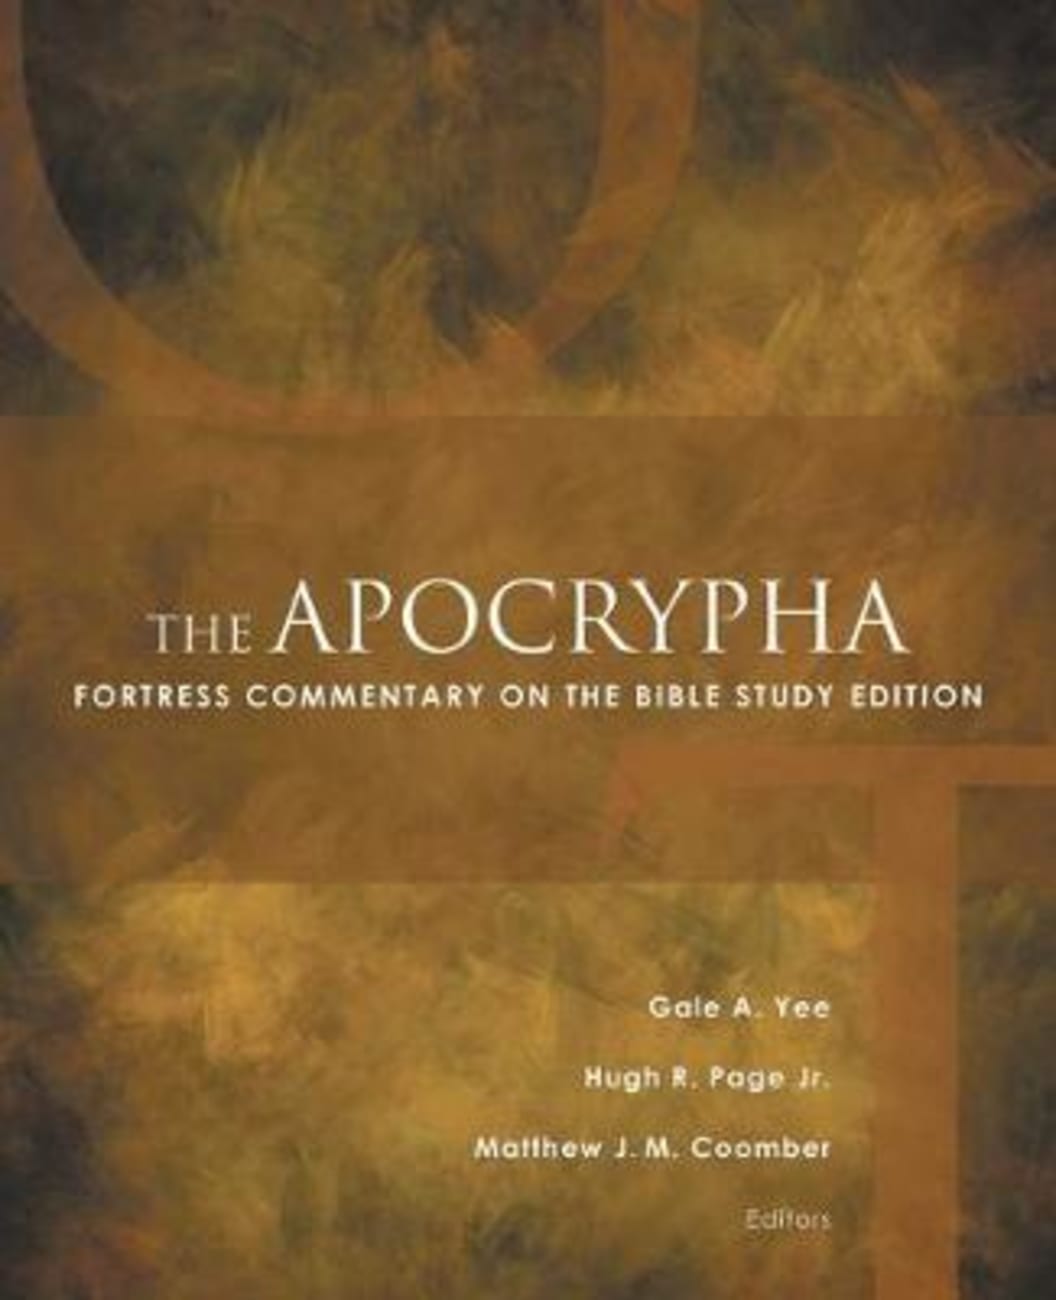 The Apocrypha (Fortress Commentary On The Bible Series) Paperback